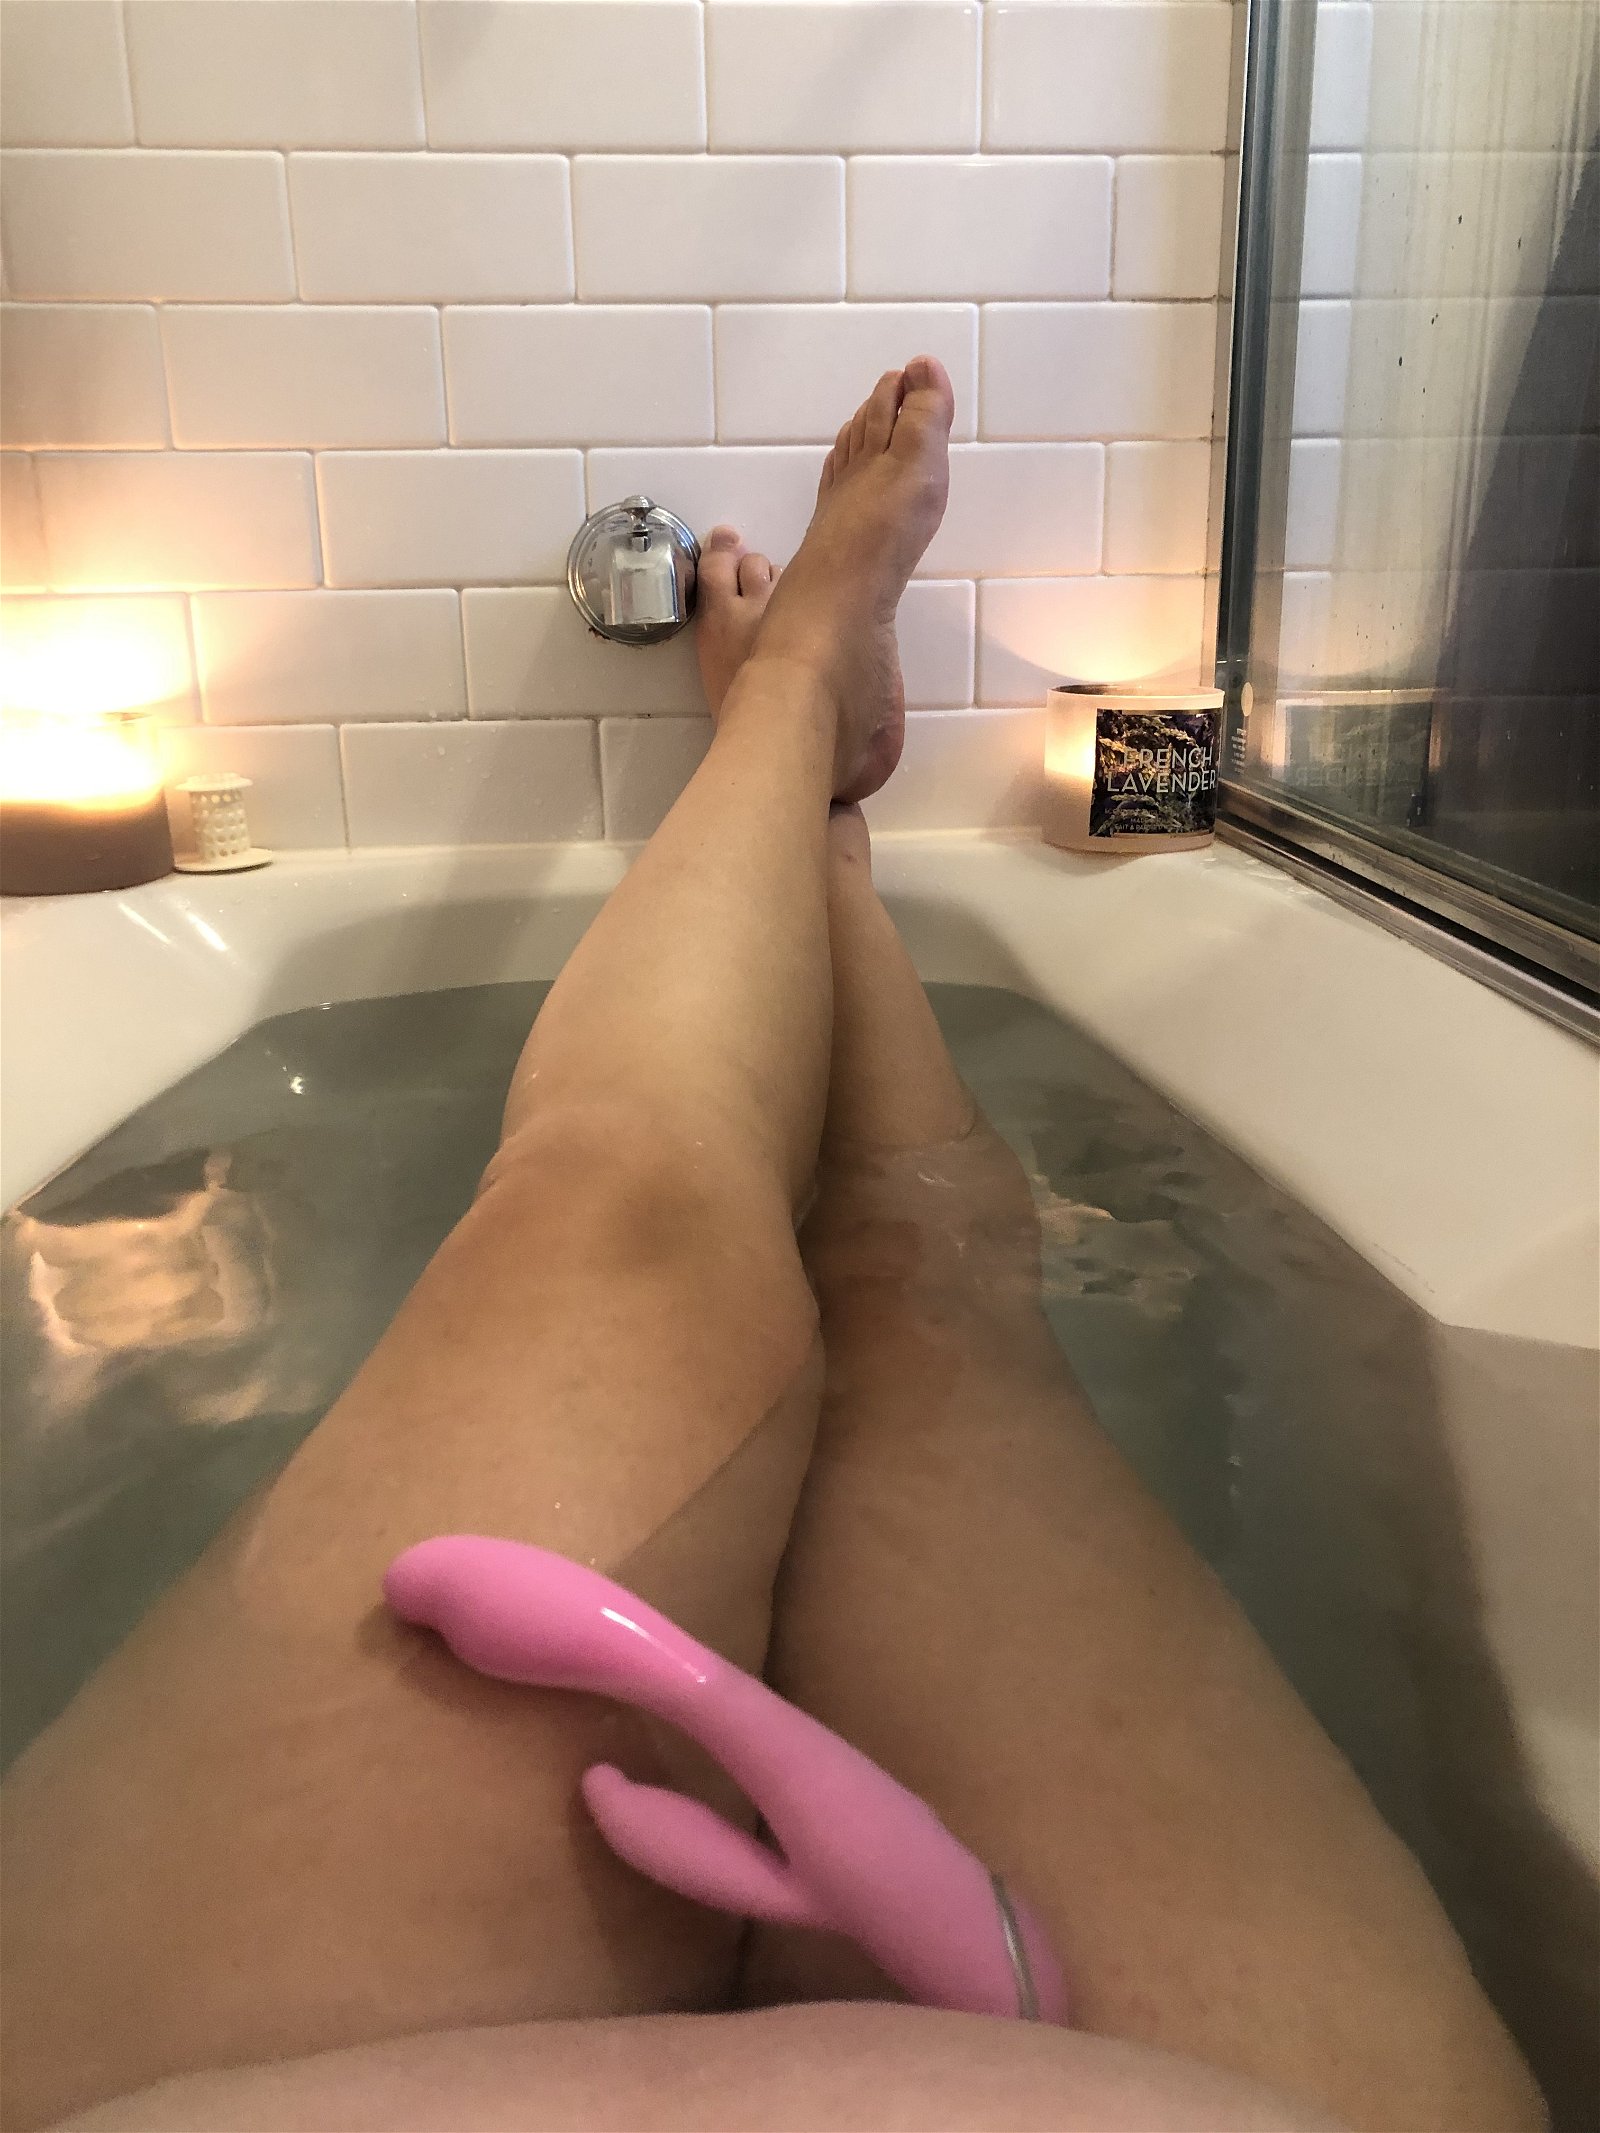 Photo by Bigtitsgirl with the username @Bigtitsgirl,  August 16, 2019 at 12:09 AM. The post is about the topic Amateurs and the text says 'Me and the little friend enjoying some much needed relaxation
#chubby #thighs #masturbate #thick'